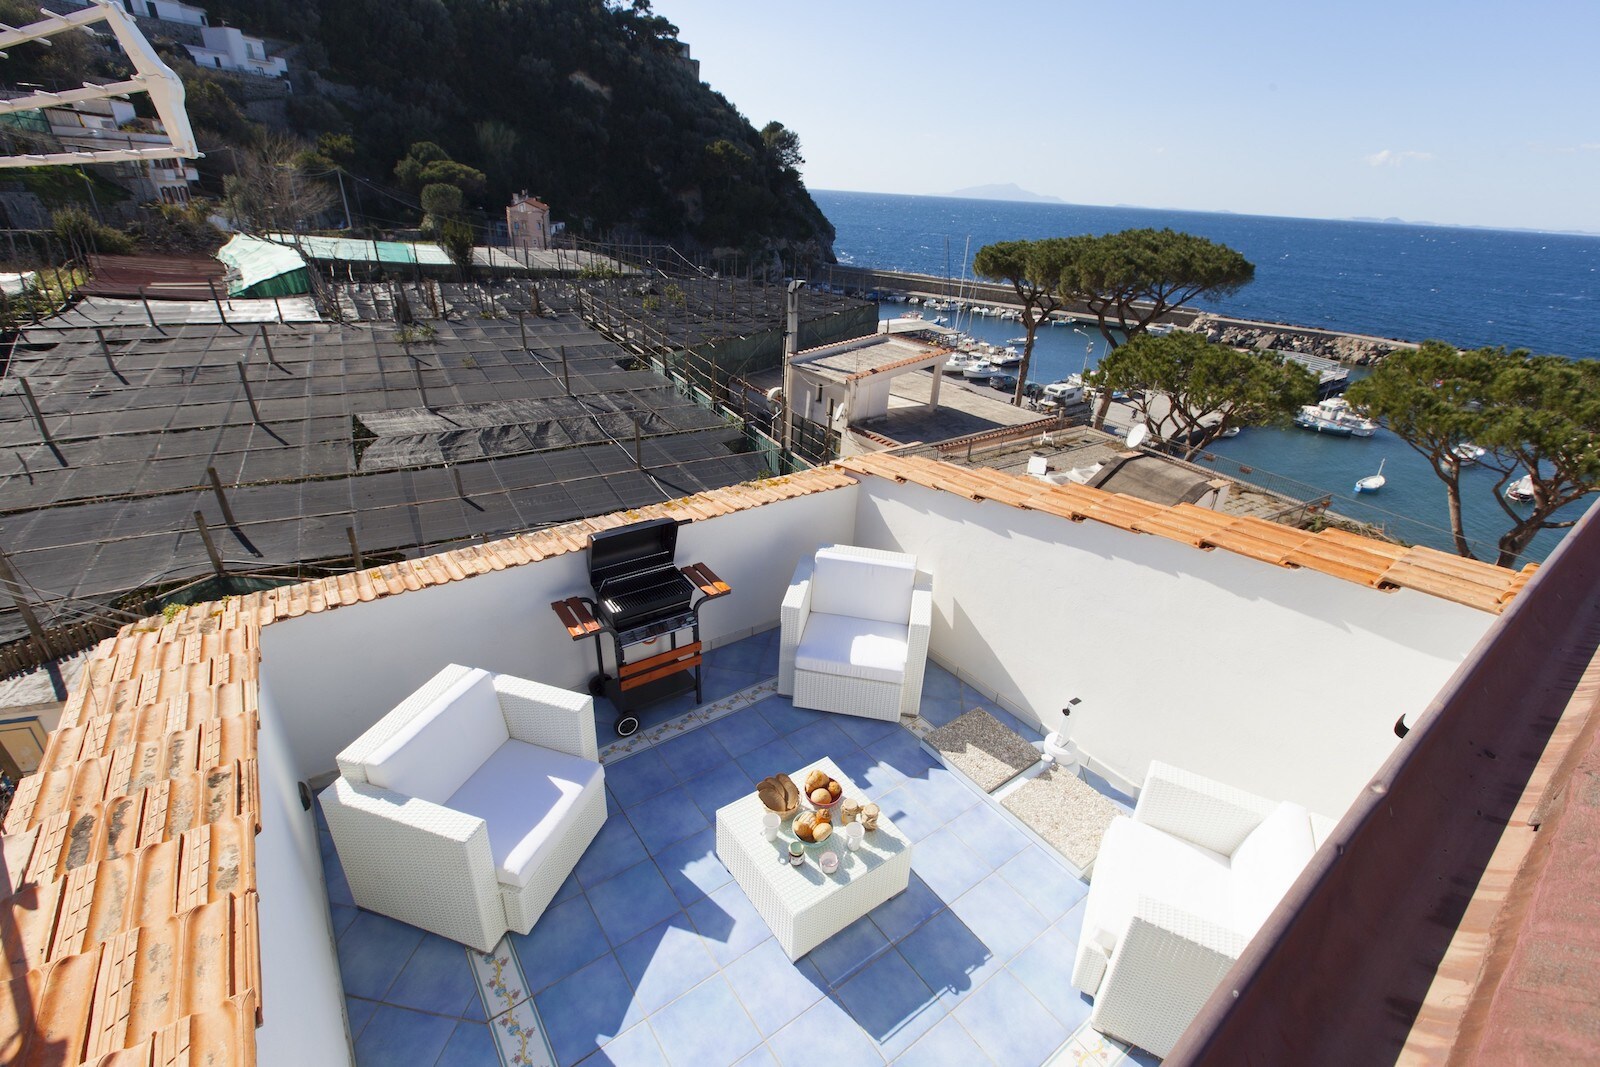 Property Image 1 - Tetto Bianco. Modern 2 bedrooms apartment near the sea. Sea Views. Access through steps